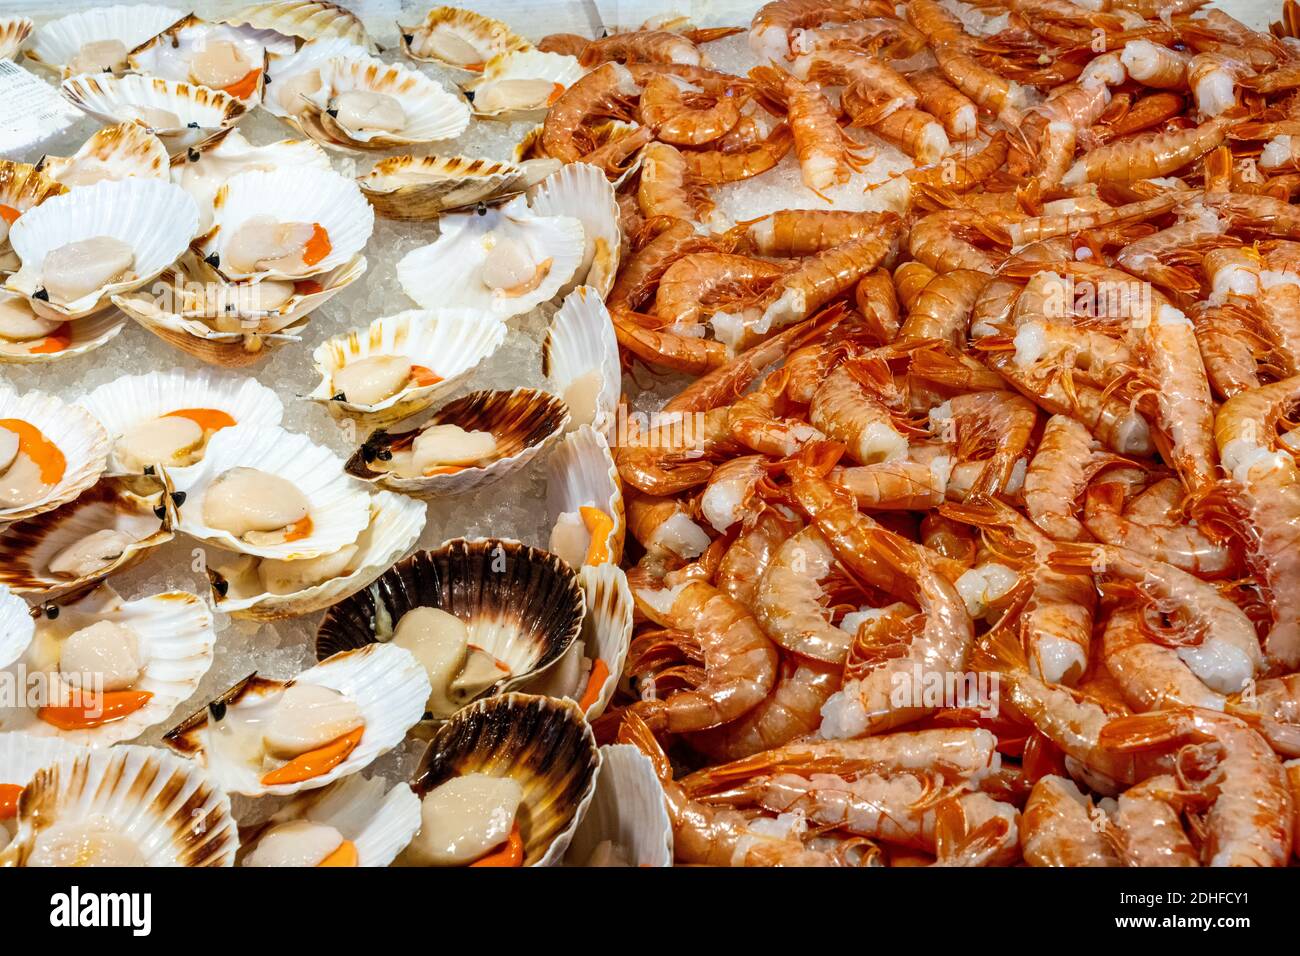 Mediterranean scallop and shrimps for sale at a market in Venice, Italy Stock Photo